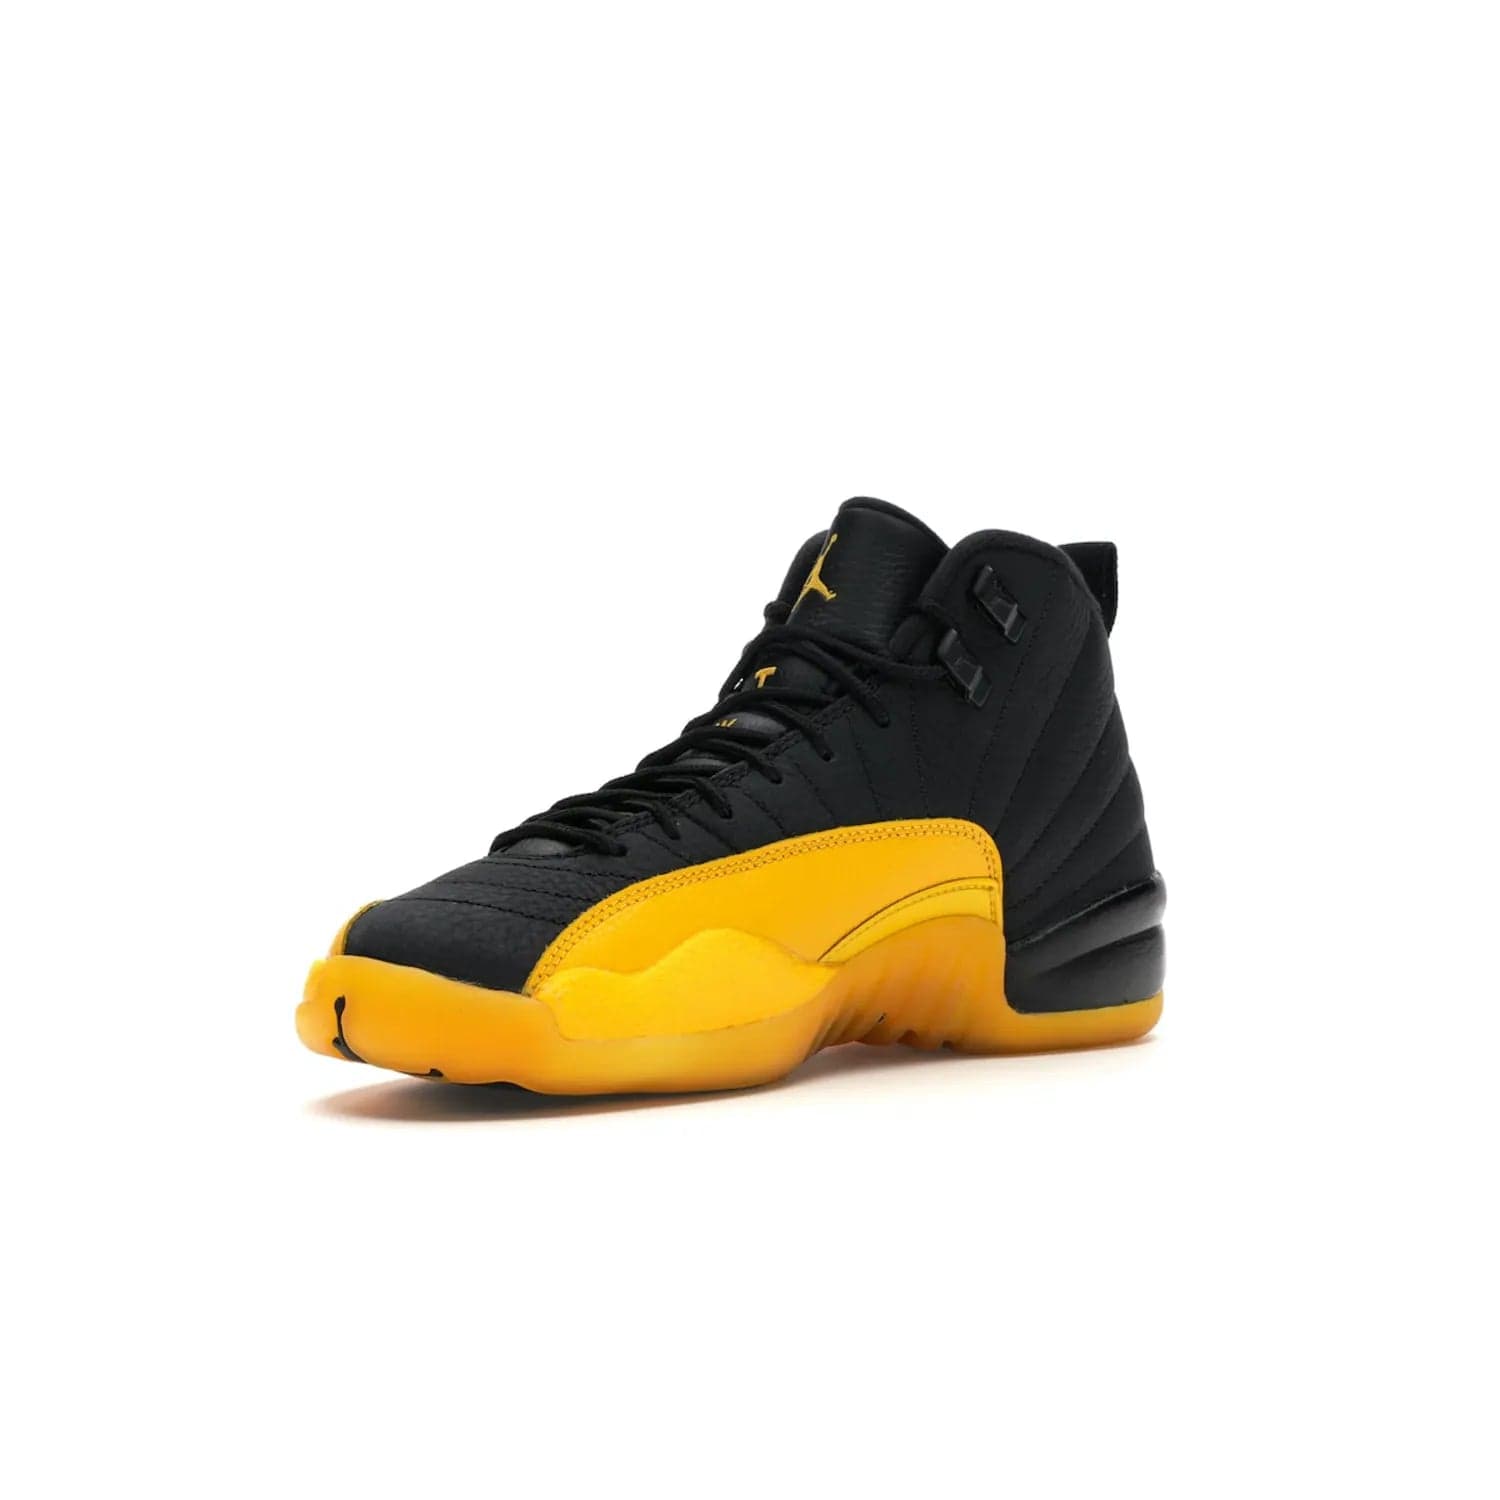 Jordan 12 Retro Black University Gold (GS) - Image 15 - Only at www.BallersClubKickz.com - Upgrade your kid's shoe collection with the Jordan 12 Retro Black University Gold. With classic style, black tumbled leather upper, and University Gold accents, it's a great summer look. Out July 2020.